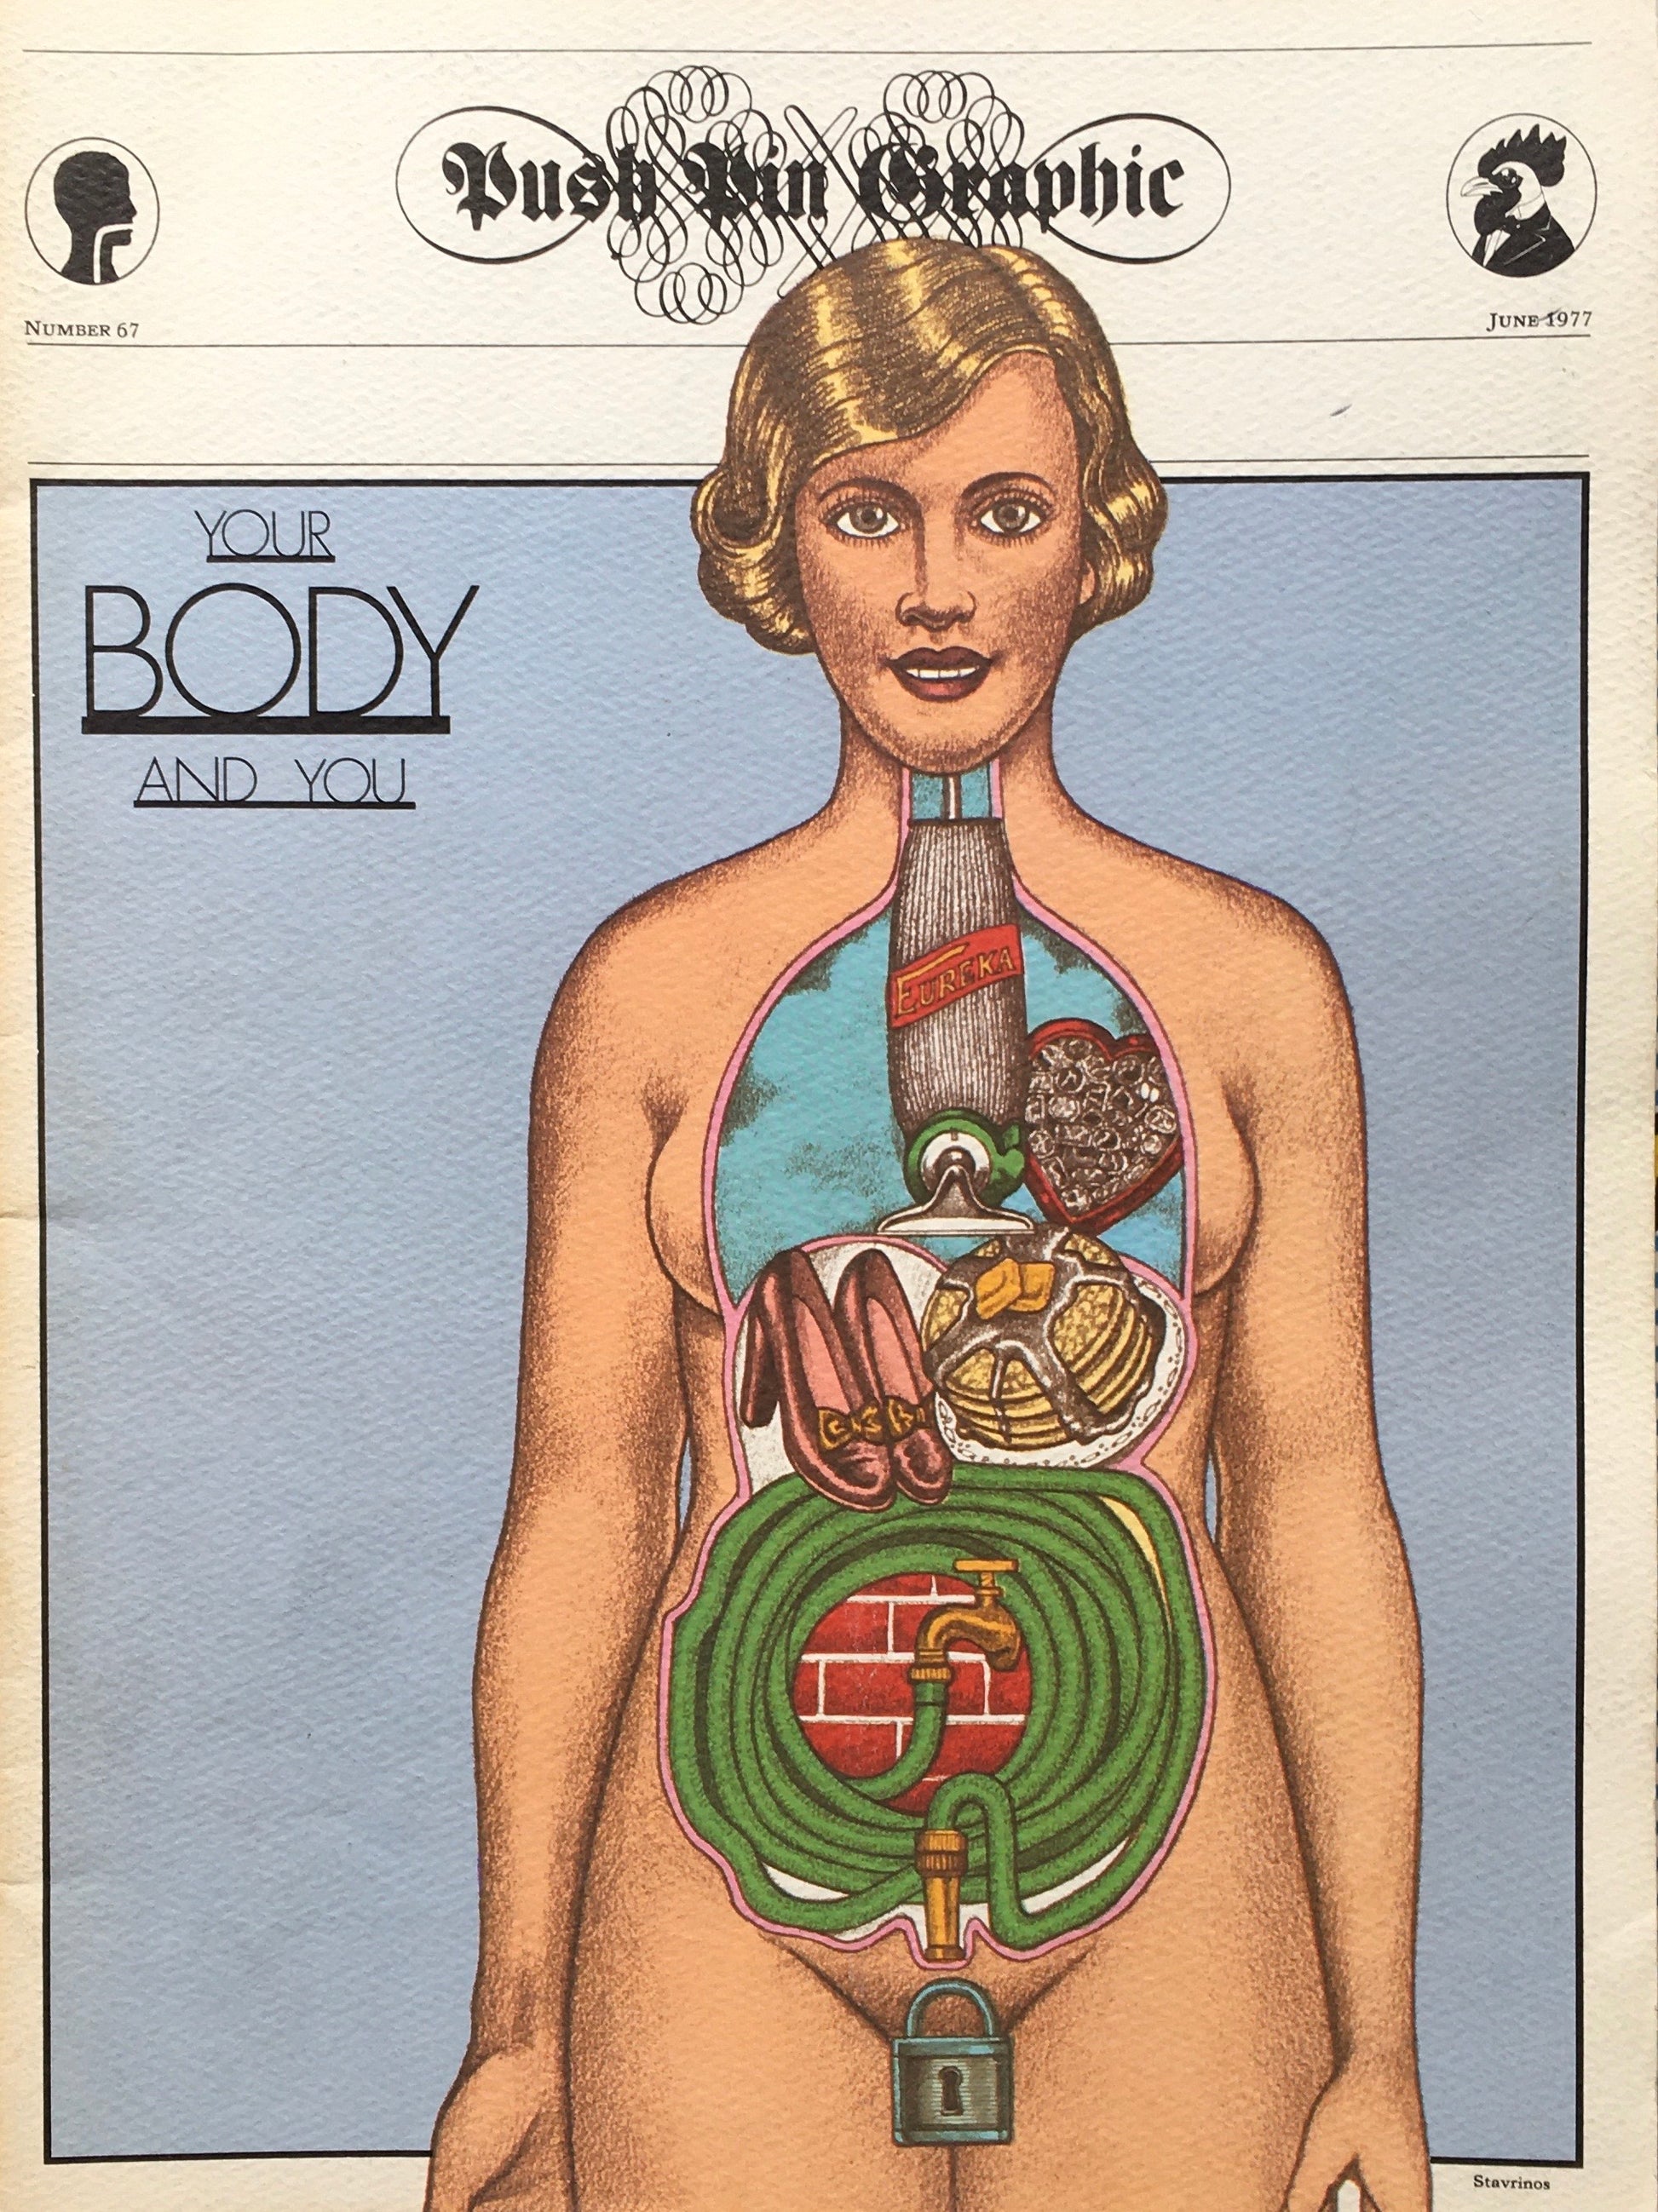 Push Pin Graphic No.67　JUNE 1977　YOUR BODY AND YOU